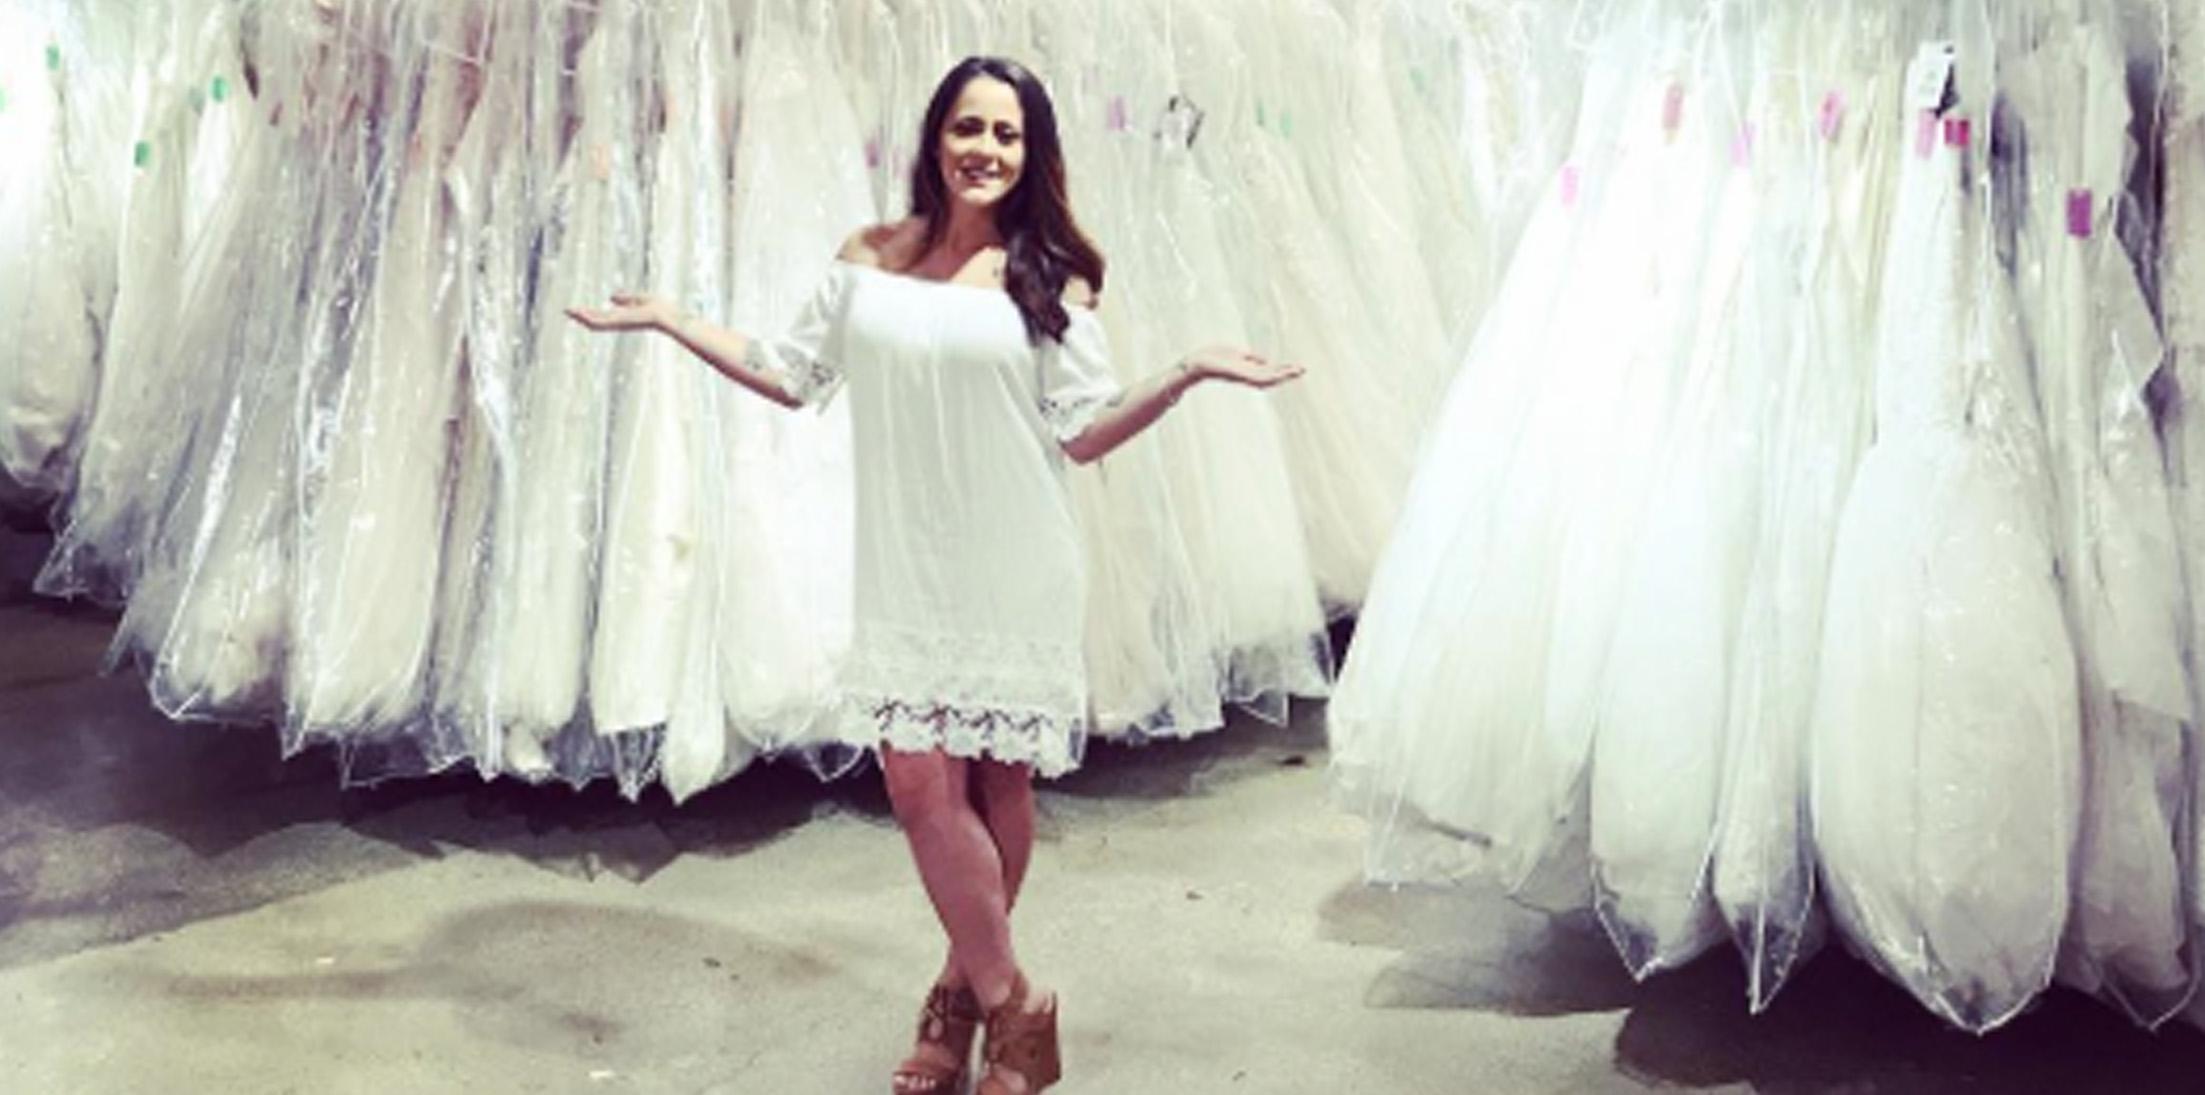 Jenelle Said Yes Find Out All Of The Details About Evans Wedding Dress 